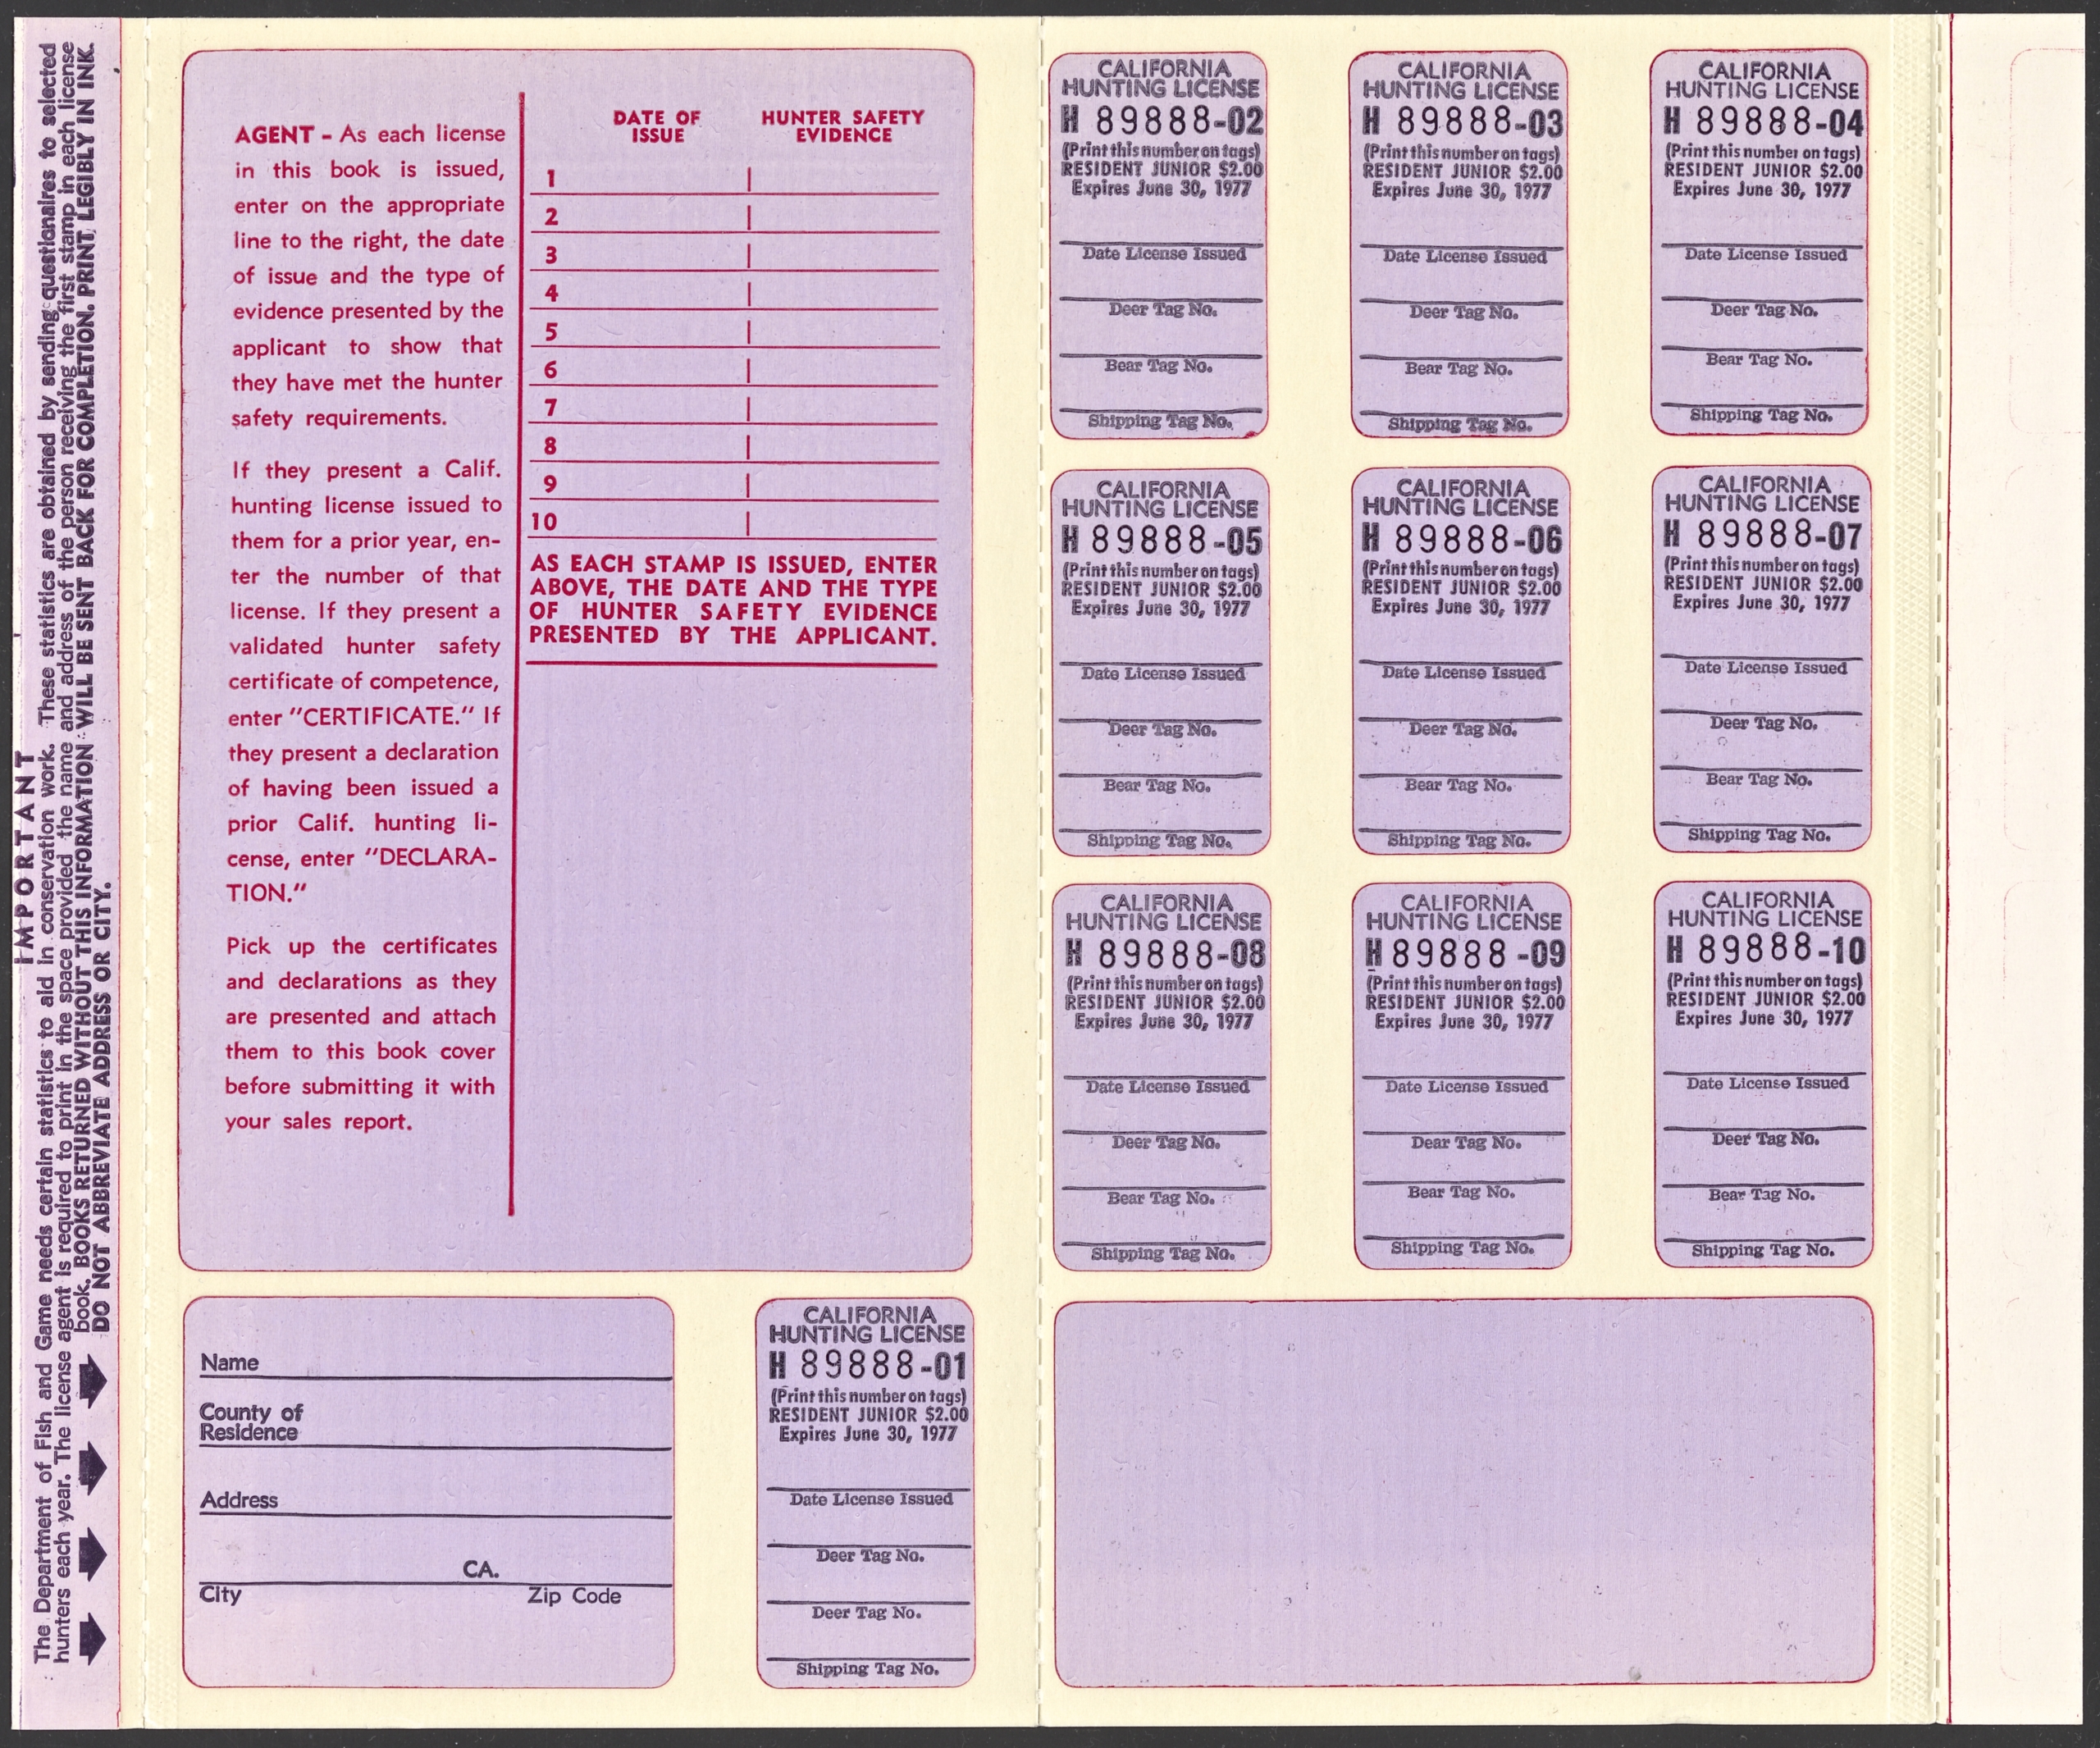 1976-77 California Junior Hunting License Validation Booklet showing Errors in Positions one and Nine